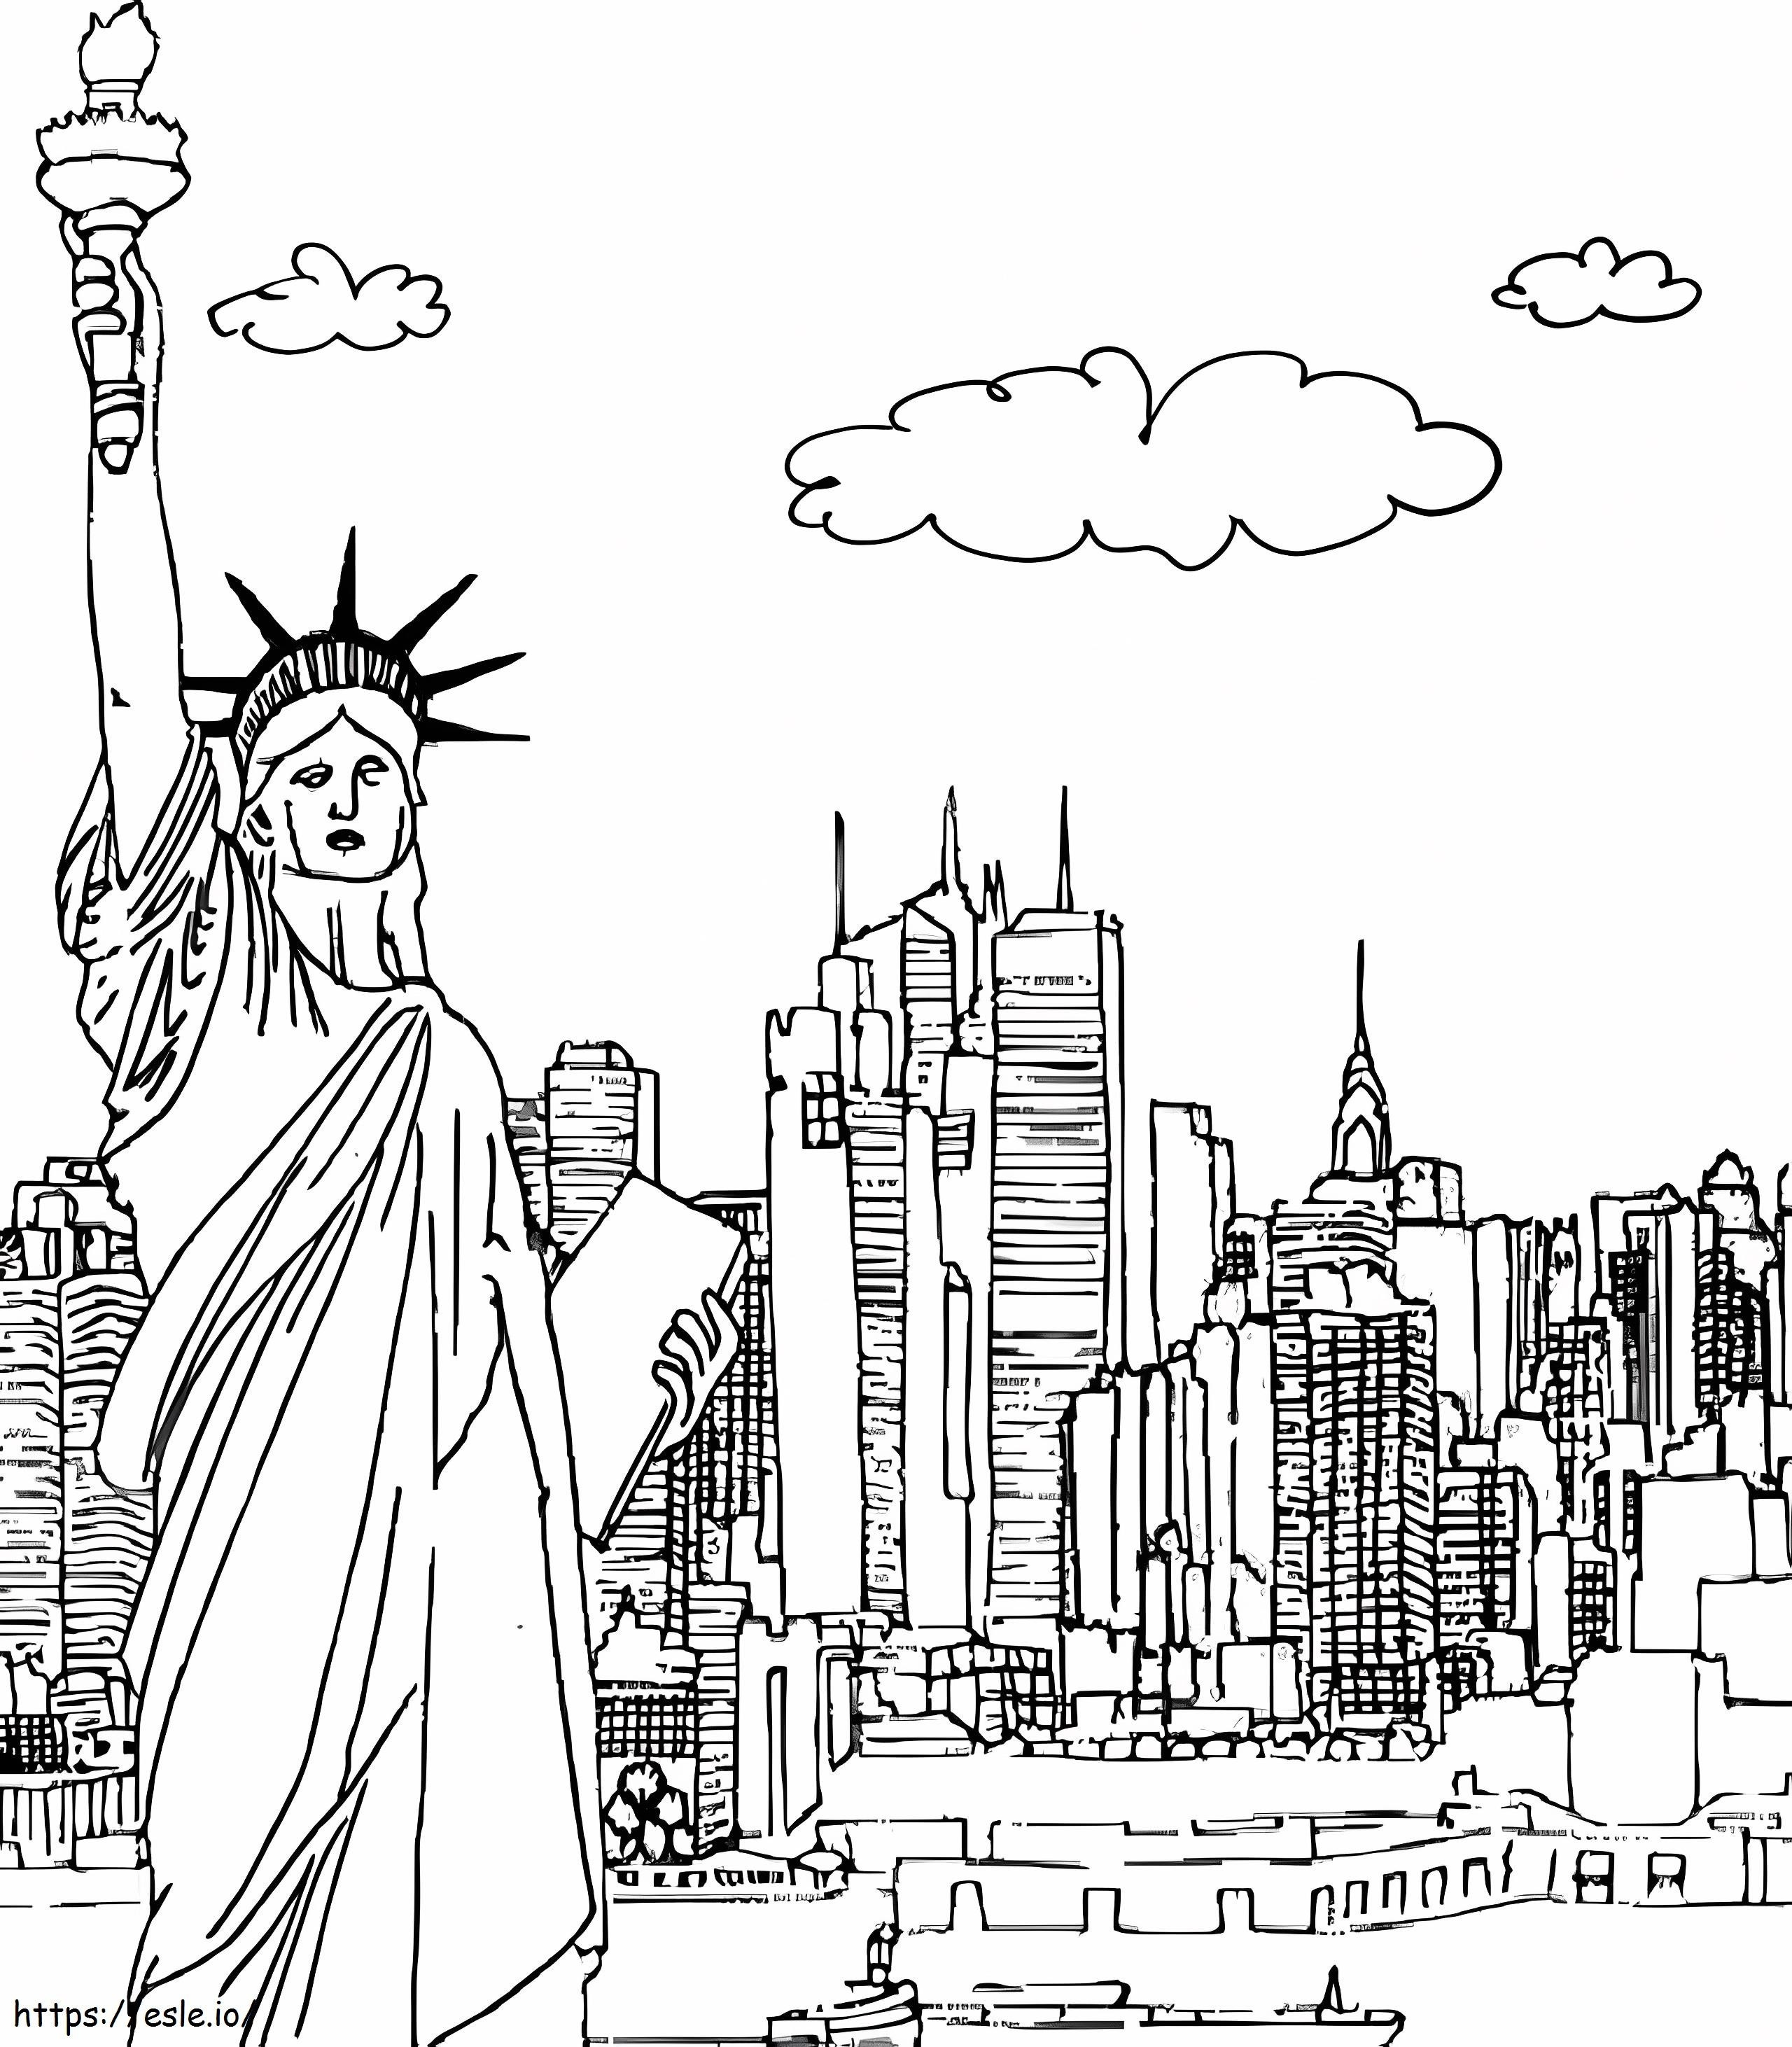 Draw City Construction In The USA coloring page